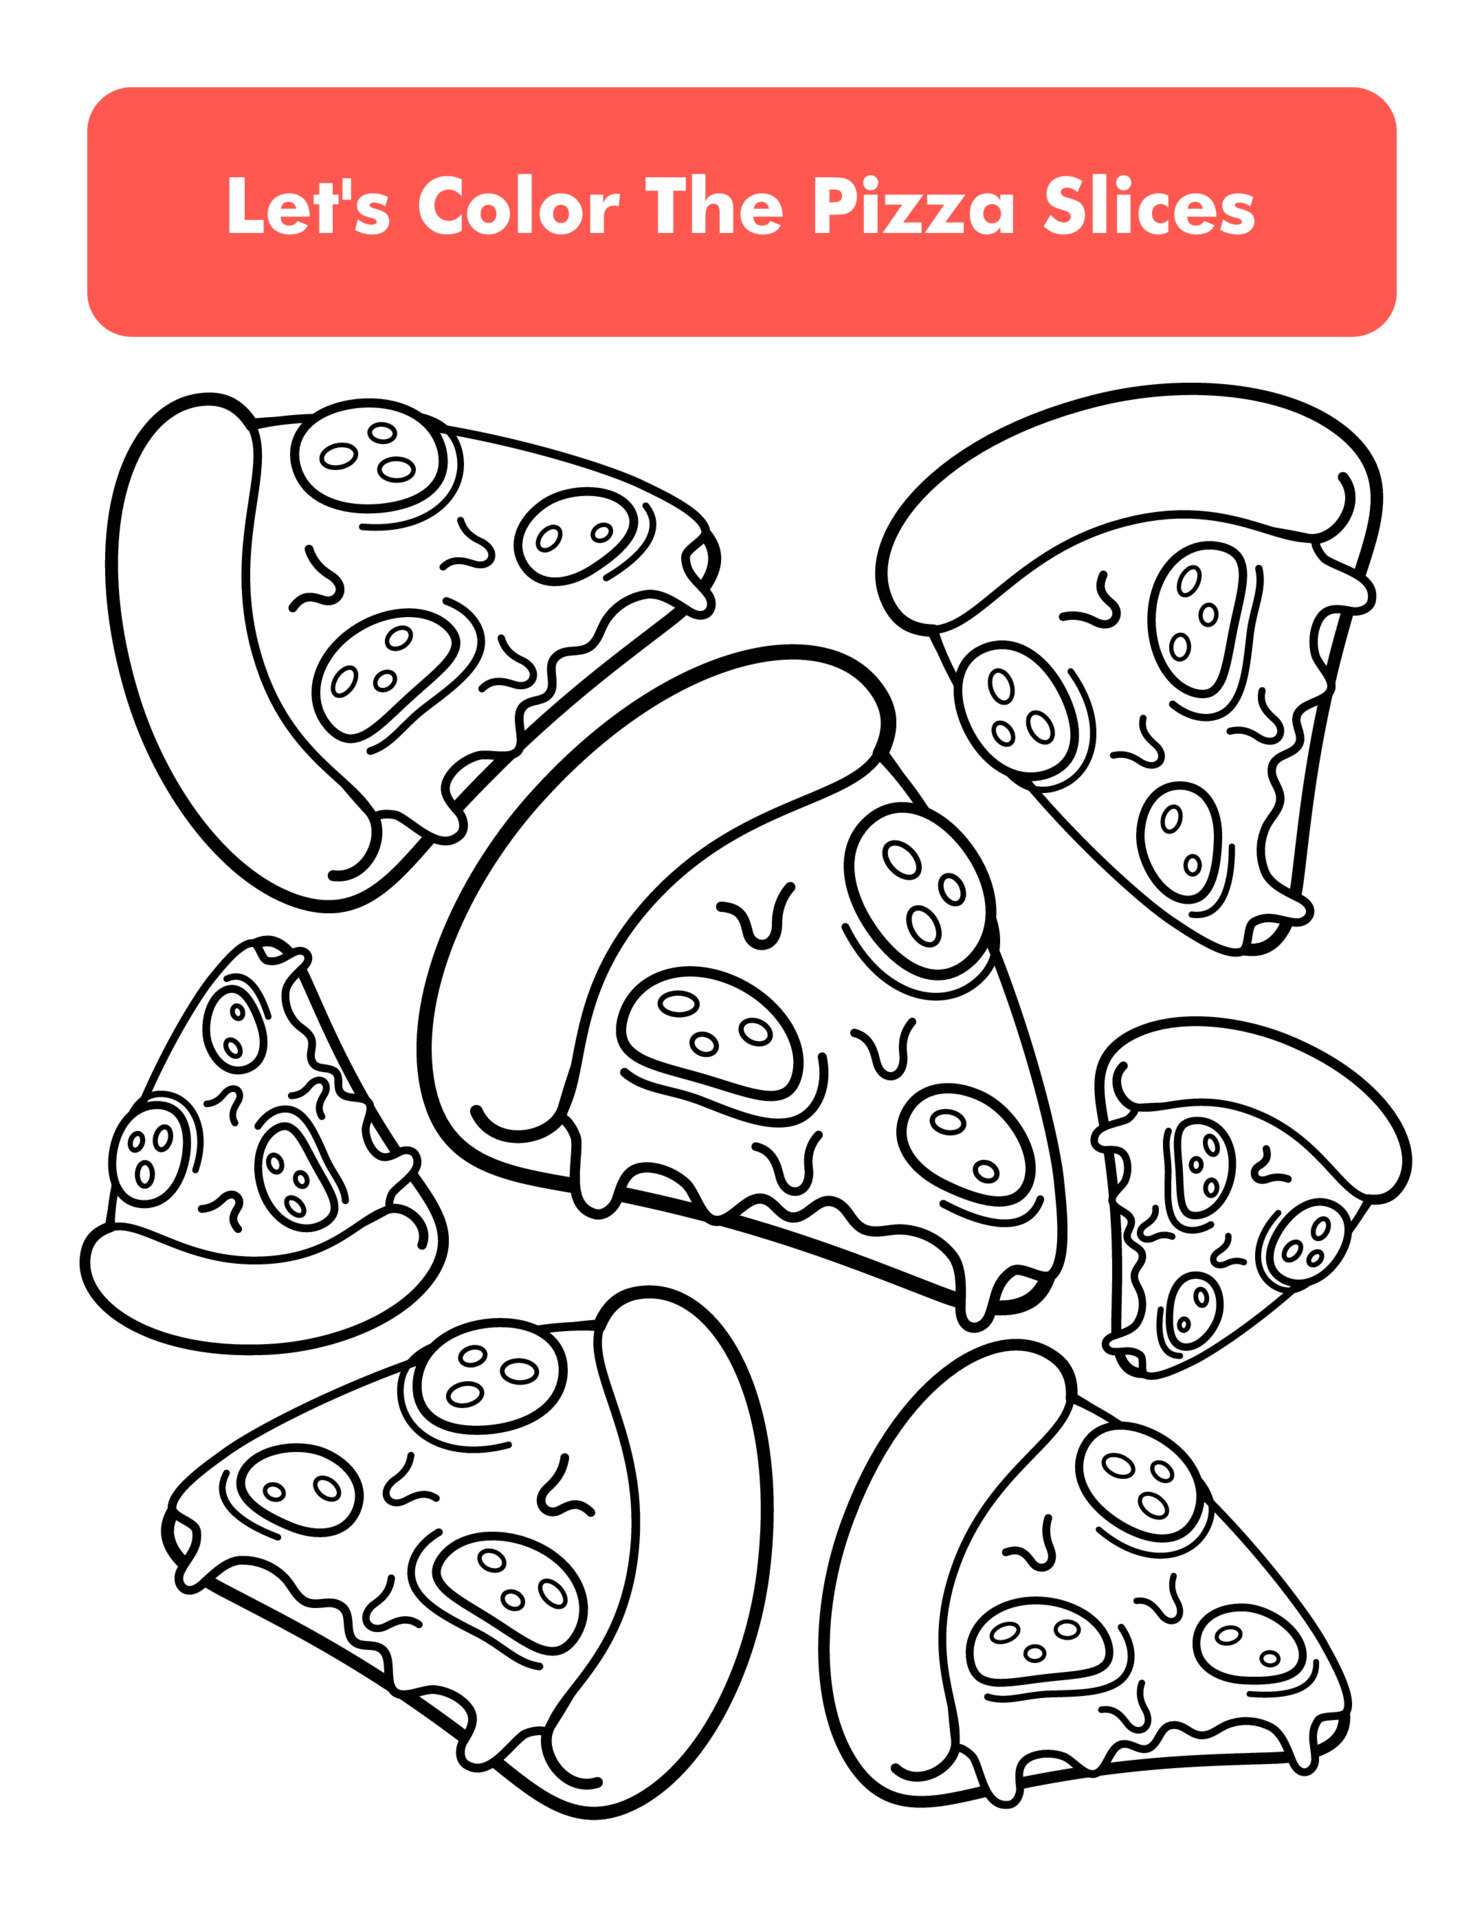 How to Draw a Pizza Step by Step - EasyLineDrawing